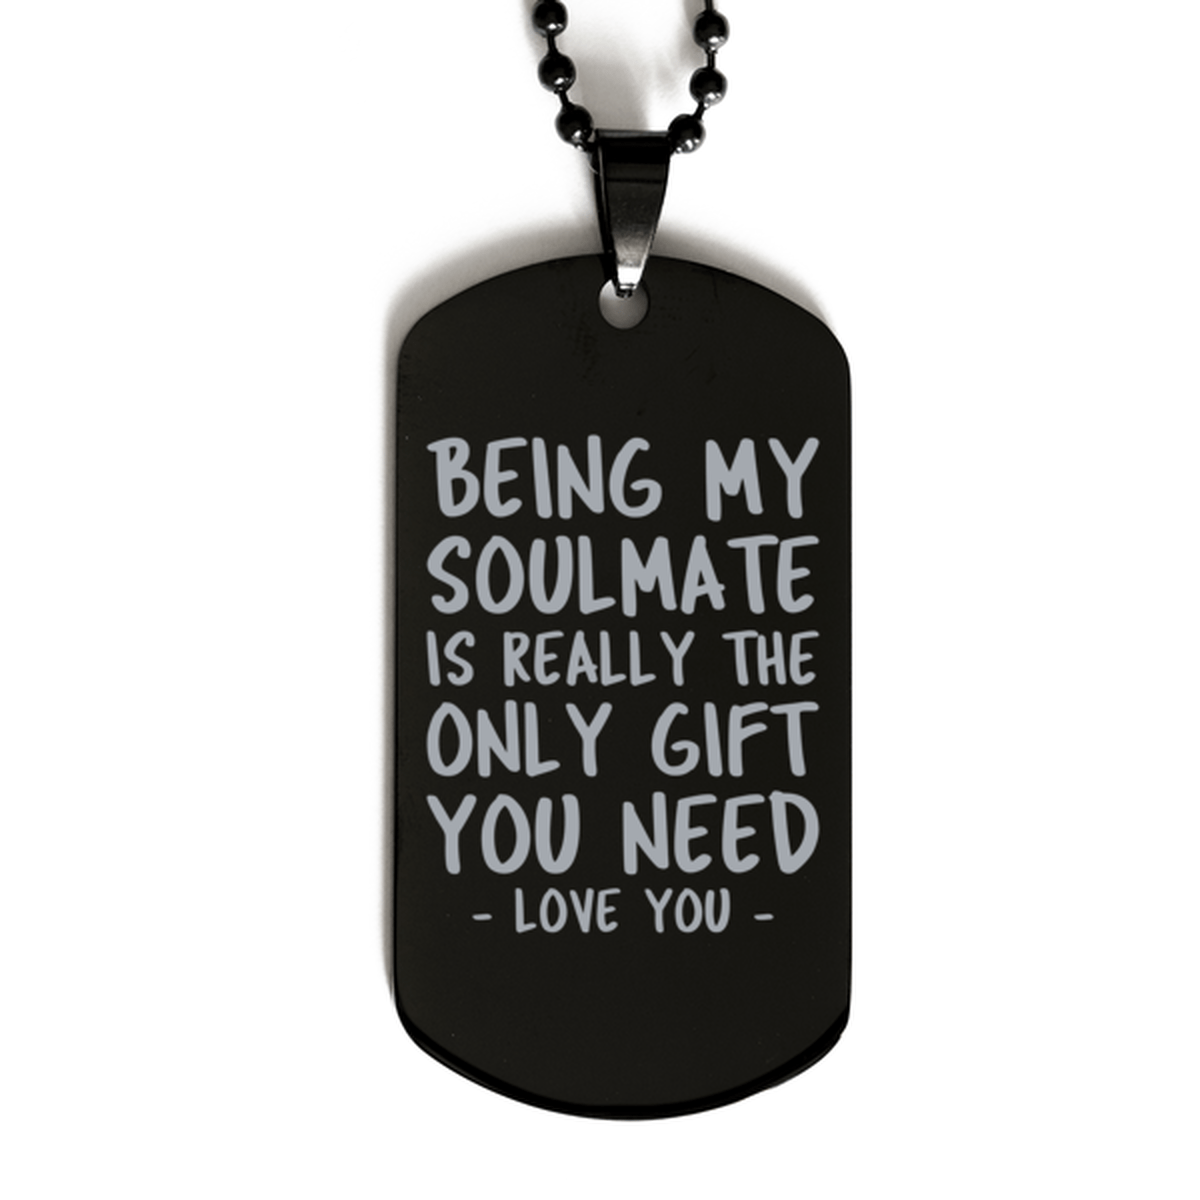 Funny Soulmate Black Dog Tag Necklace, Being My Soulmate Is Really the Only Gift You Need, Best Birthday Gifts for Soulmate